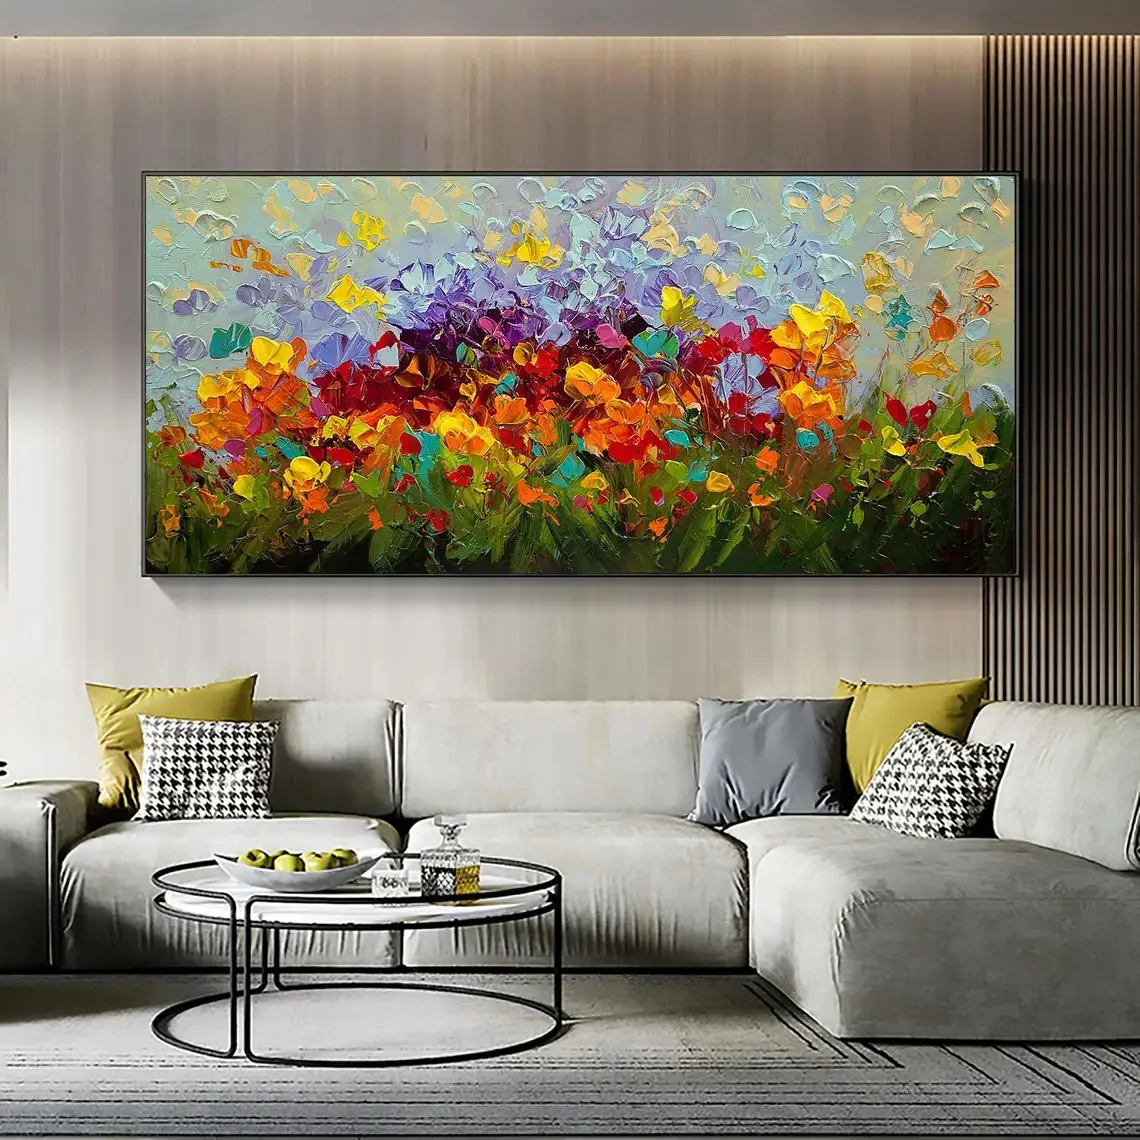 Abstract Colorful Flower Landscape Oil Painting Print on Canvas Large Size Wall Art Canvas Poster Picture for Modern Home Decor